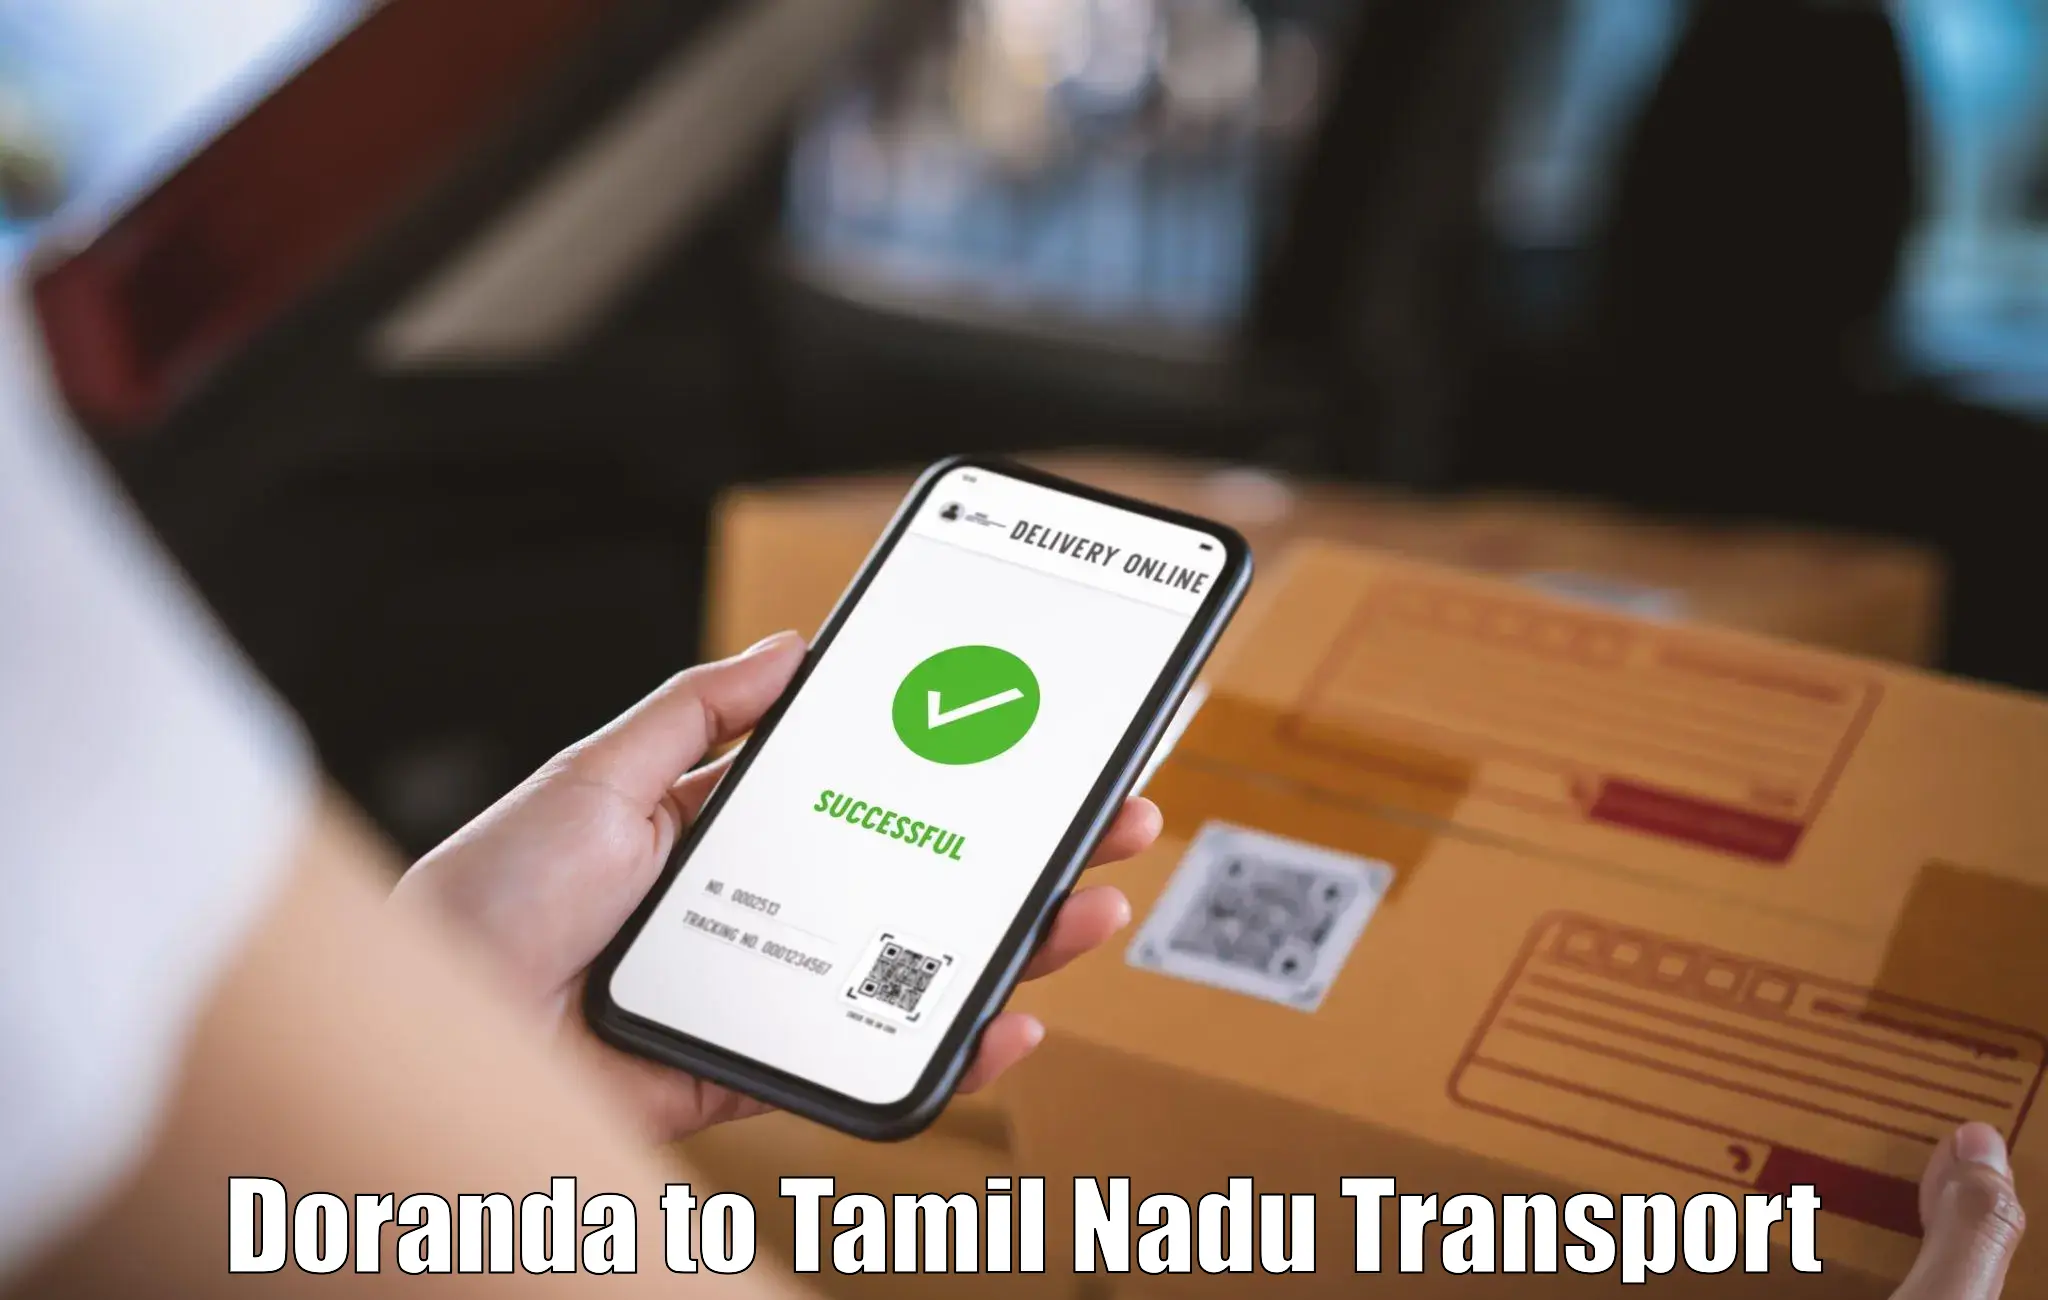 Package delivery services Doranda to Sathyamangalam